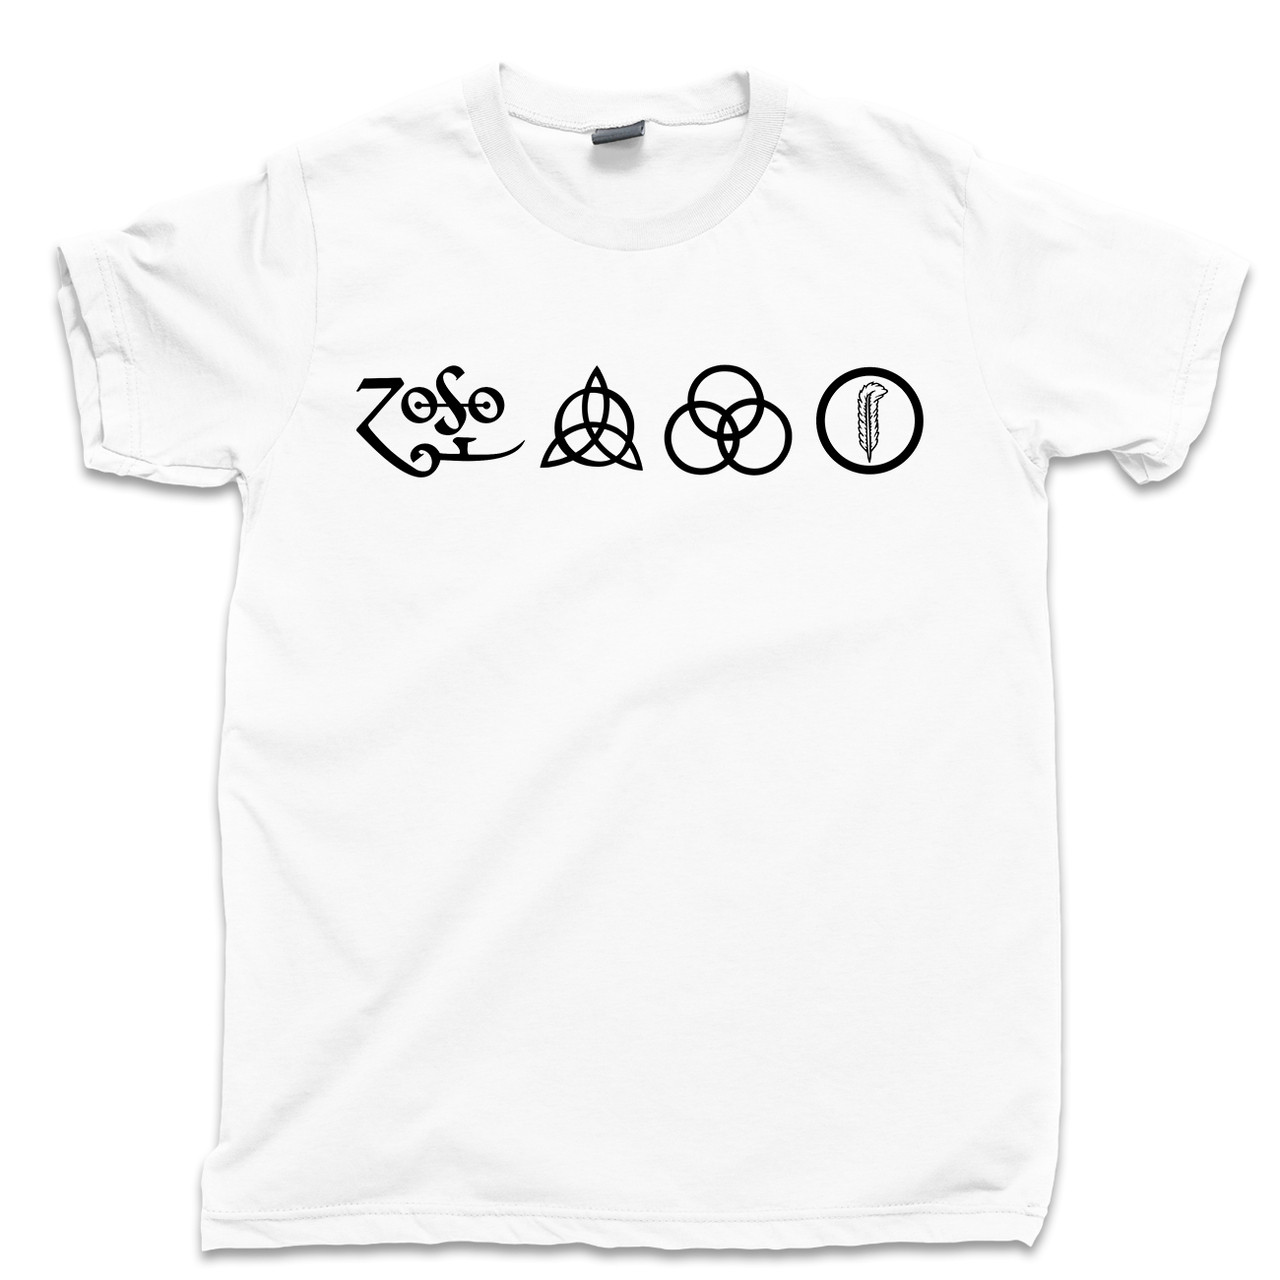 Led Zeppelin 4 Symbols T Shirt, Page And Plant, Stairway To Heaven, Zoso Tee